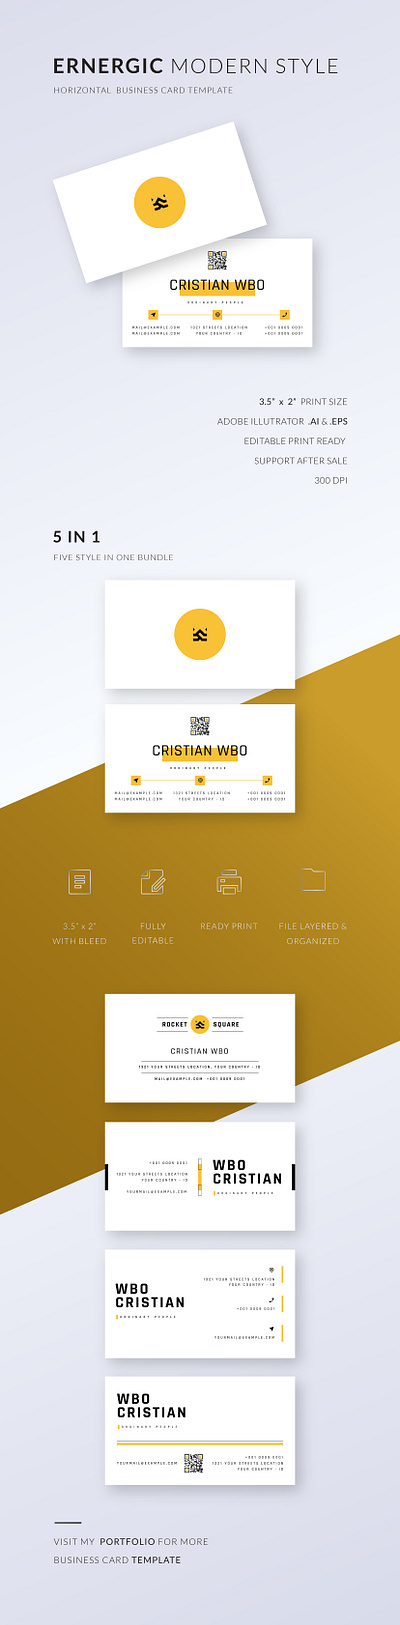 ENERGIC MODERN AND STYLISH BUSINESS CARD TEMPLATE branding business business card card design editable editable business card editable energic energic energic business card logo marketing branding modern modern business card qr code qr code business card vector vector business card white yellow yellow business card